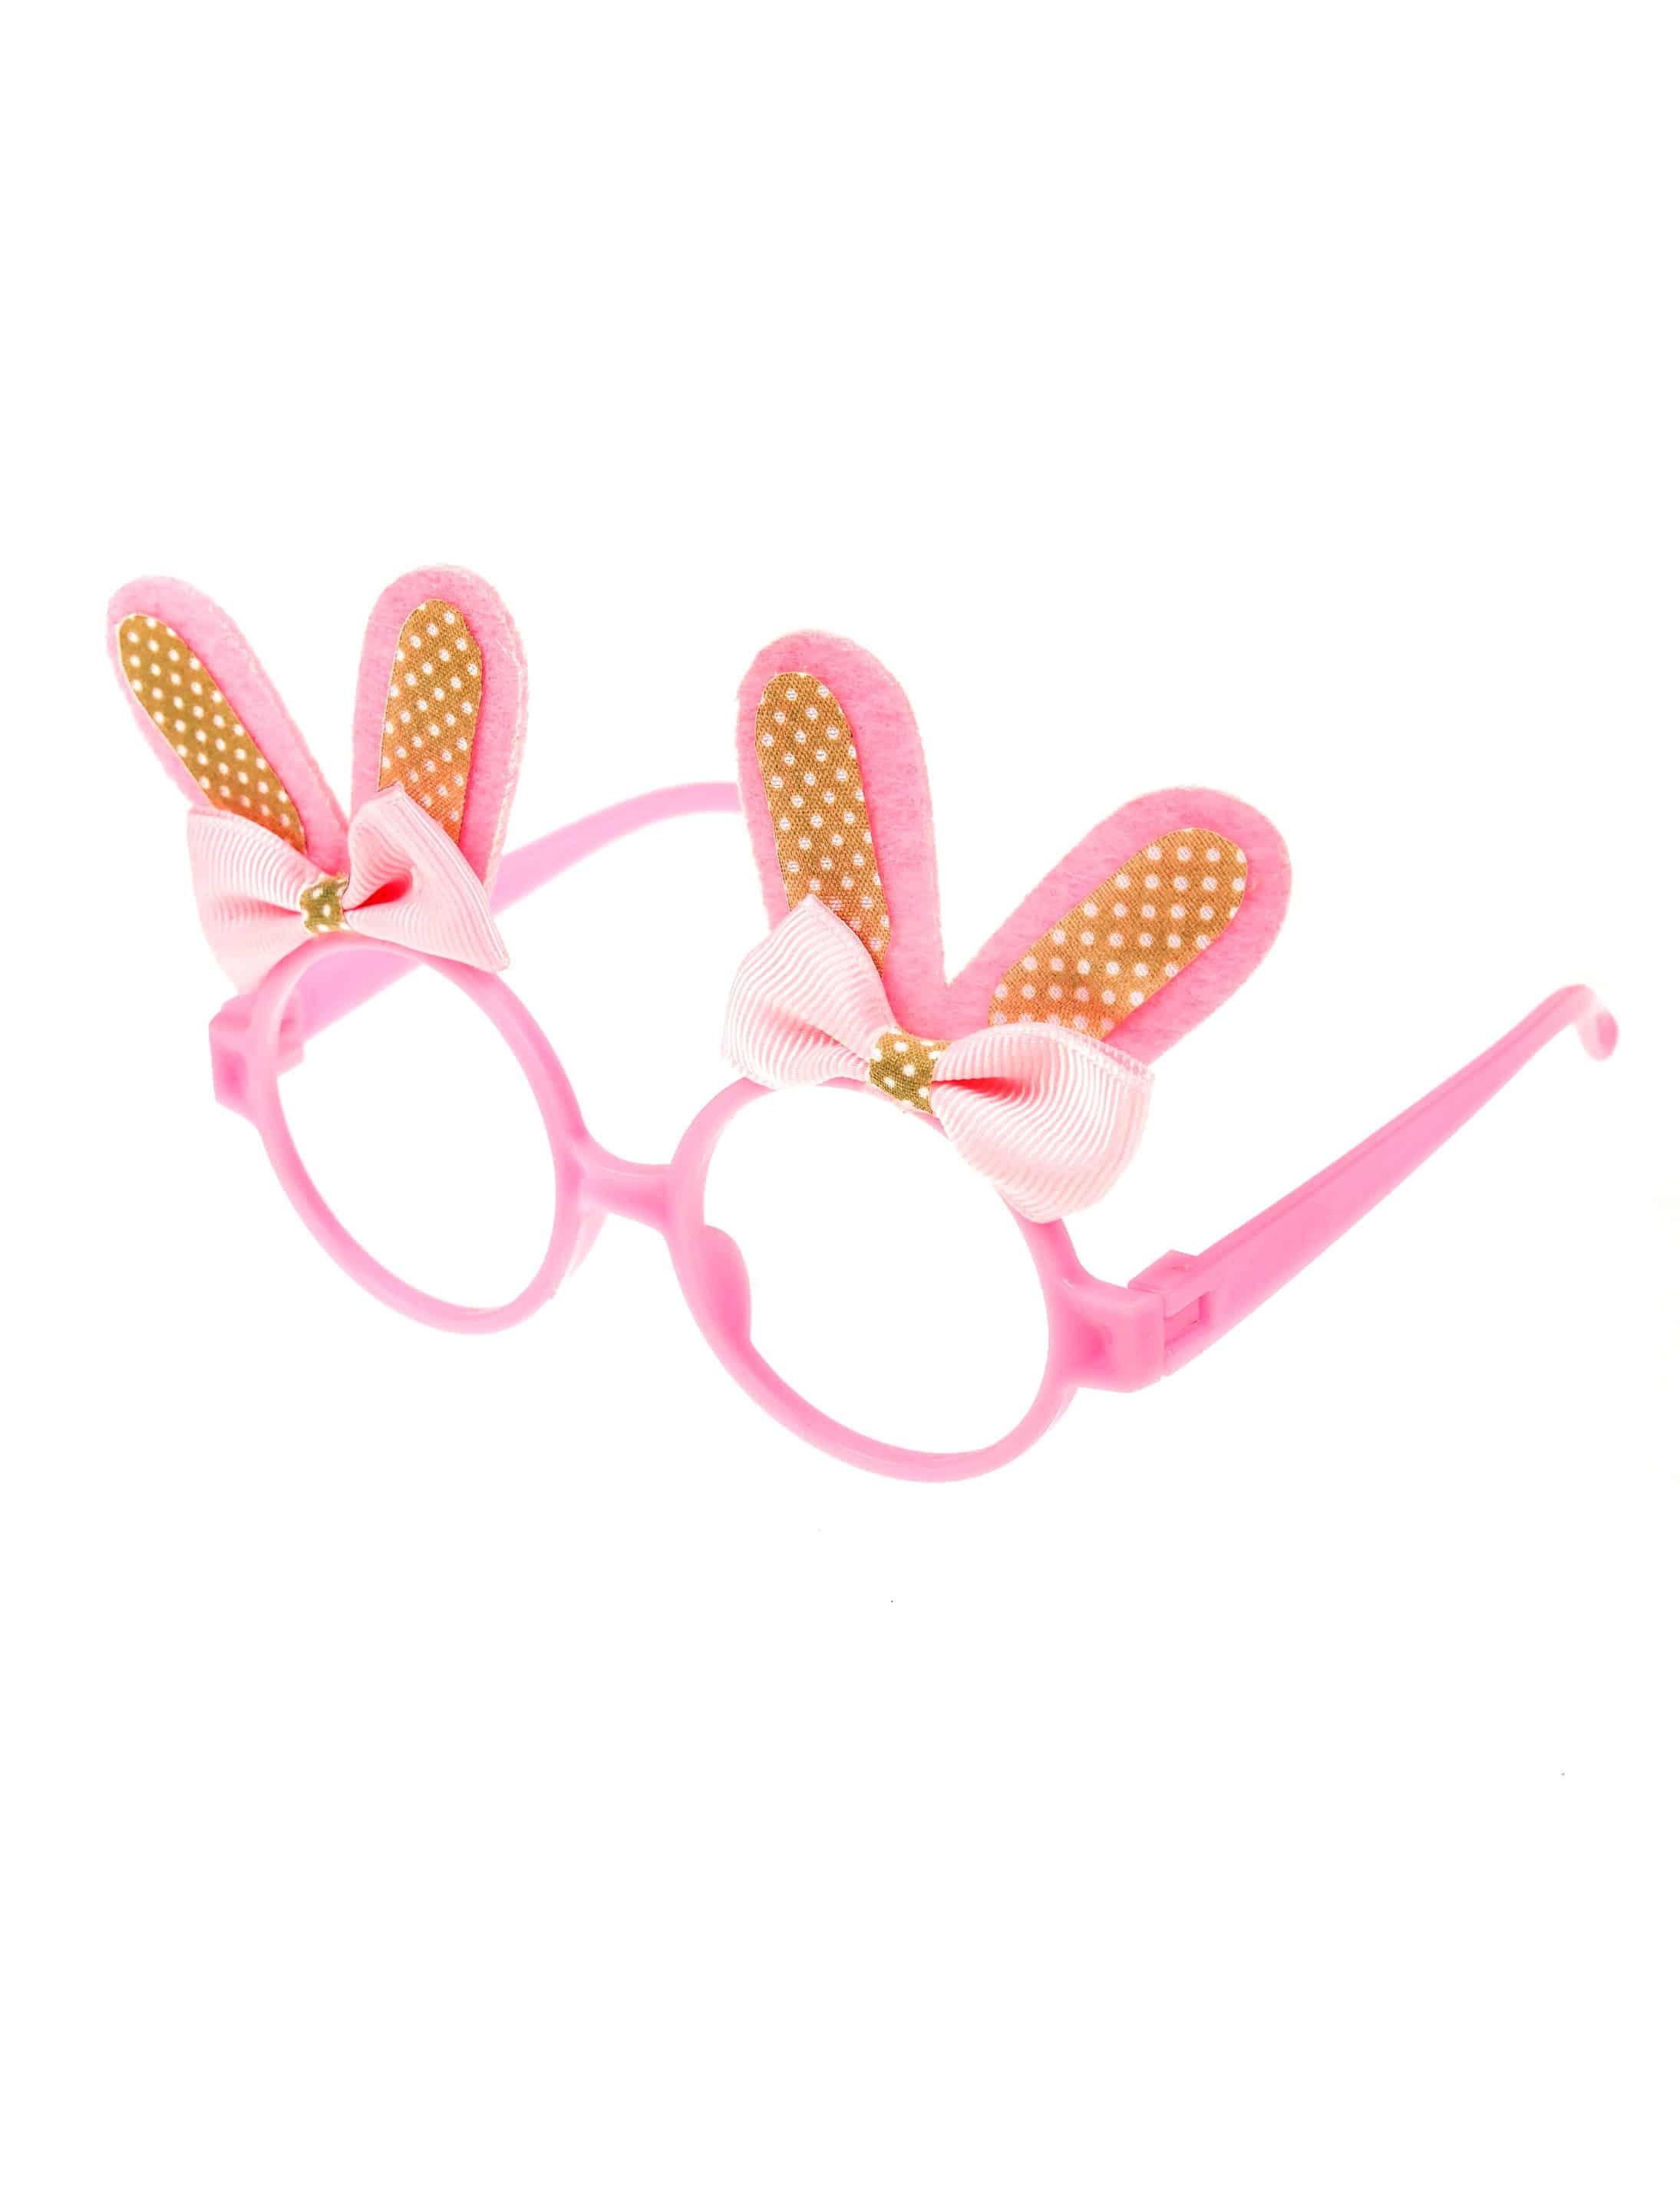 Brille Hase rosa